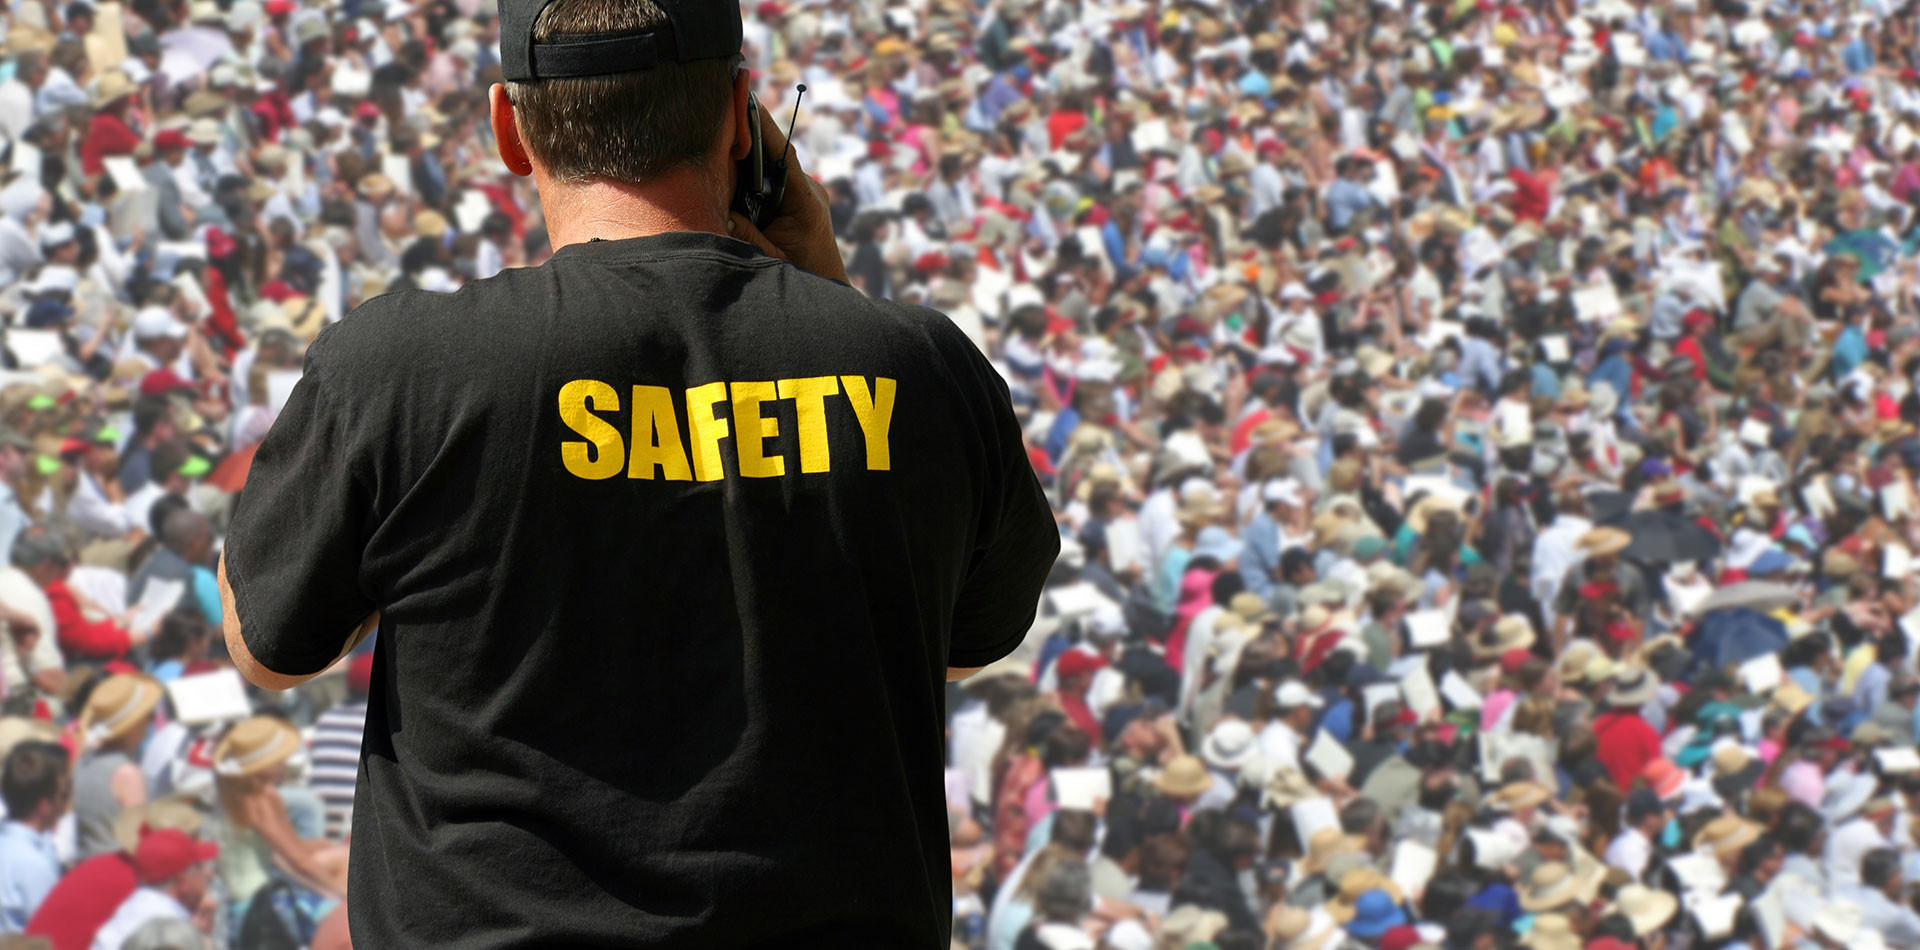 Crowd control. Crowd Safety. England event Safety.